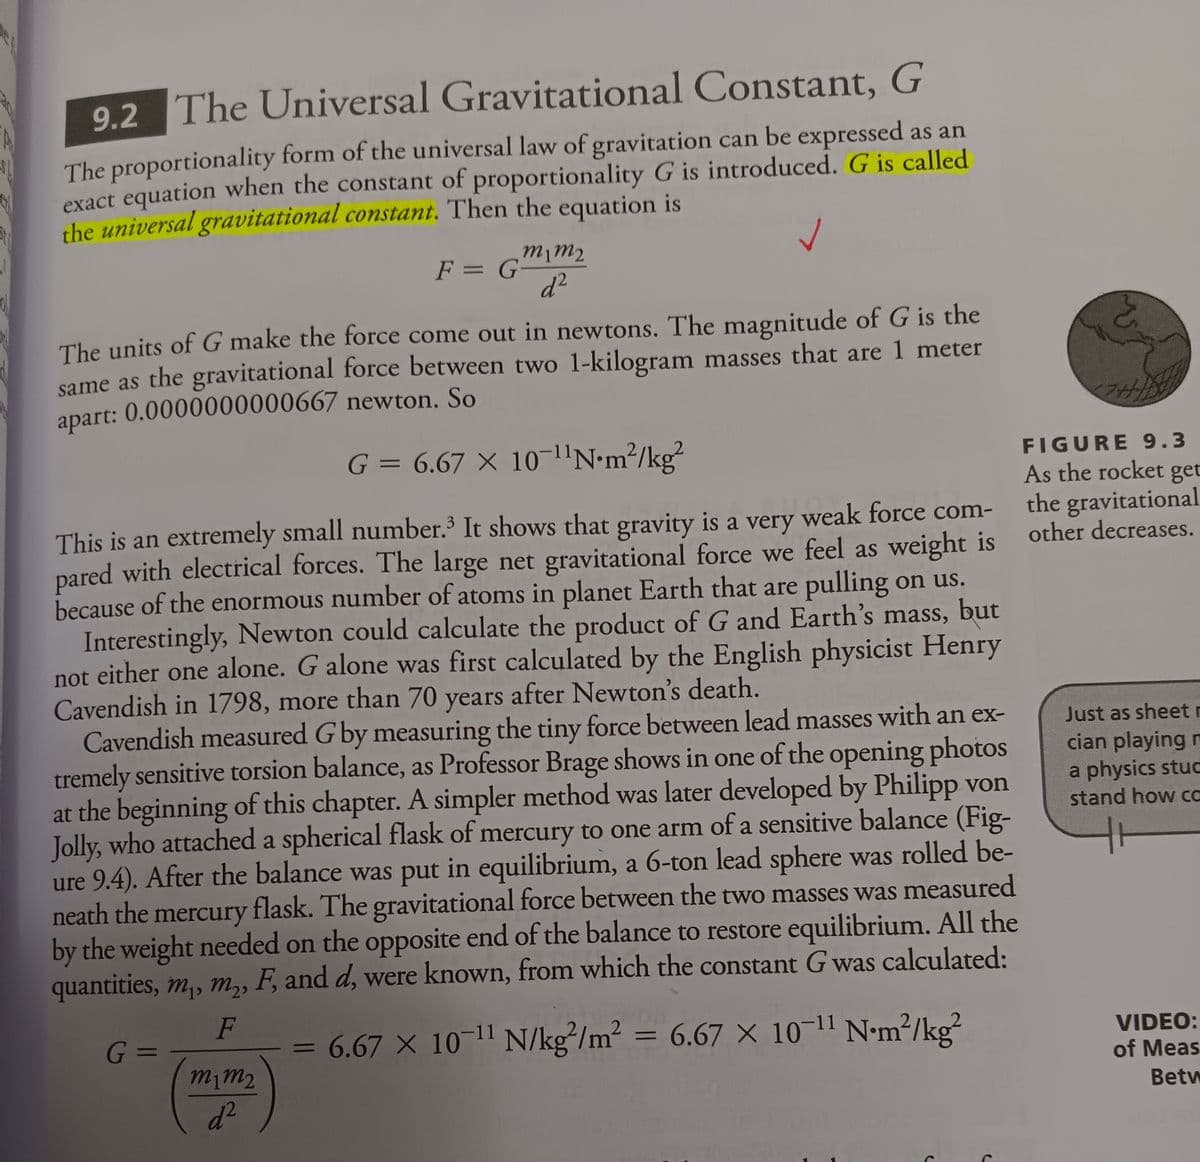 9.2 The Universal Gravitational Constant, G
The proportionality form of the universal law of gravitation can be expressed as an
exact equation when the constant of proportionality G is introduced. G is called
the universal gravitational constant. Then the equation is
The units of G make the force come out in newtons. The magnitude of G is the
same as the gravitational force between two 1-kilogram masses that are 1 meter
apart: 0.0000000000667 newton. So
G = 6.67 X 10-¹¹N•m²/kg²
This is an extremely small number.³ It shows that gravity is a very weak force com-
pared with electrical forces. The large net gravitational force we feel as weight is
because of the enormous number of atoms in planet Earth that are pulling on us.
Interestingly, Newton could calculate the product of G and Earth's mass, but
not either one alone. G alone was first calculated by the English physicist Henry
Cavendish in 1798, more than 70 years after Newton's death.
m1m2
F = G-
d²
m1m₂
d²
Cavendish measured G by measuring the tiny force between lead masses with an ex-
tremely sensitive torsion balance, as Professor Brage shows in one of the opening photos
at the beginning of this chapter. A simpler method was later developed by Philipp von
Jolly, who attached a spherical flask of mercury to one arm of a sensitive balance (Fig-
ure 9.4). After the balance was put in equilibrium, a 6-ton lead sphere was rolled be-
neath the mercury flask. The gravitational force between the two masses was measured
by the weight needed on the opposite end of the balance to restore equilibrium. All the
quantities, m₁, m₂, F, and d, were known, from which the constant G was calculated:
F
G =
6.67 × 10-¹1 N/kg/m² = 6.67 x 10-¹¹ Nm²/kg²
-
2
y
FIGURE 9.3
As the rocket get
the gravitational
other decreases.
Just as sheet r
cian playing m
a physics stuc
stand how ca
VIDEO:
of Meas
Betw